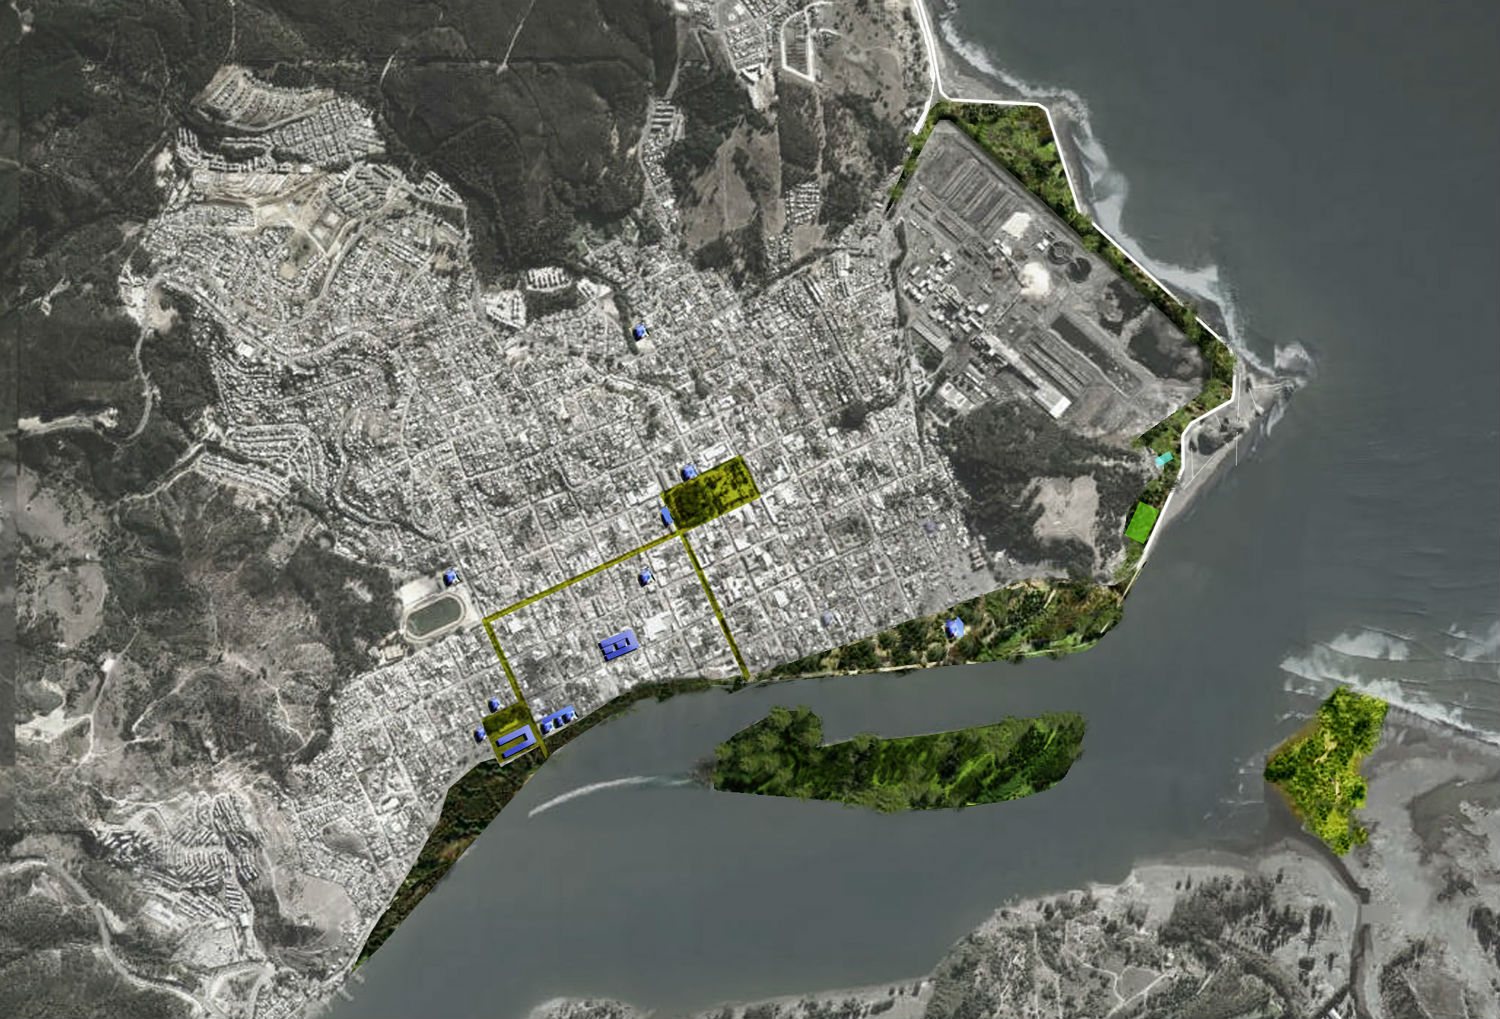 In February 2010, a huge earthquake and tsunami hit Chile, devastating the country and displacing thousands of people. The coastal city of Constitución was among the worst hit. This image shows post-tsunami reconstruction plans: growing trees along the coast creates a natural buffer against tsunamis 
